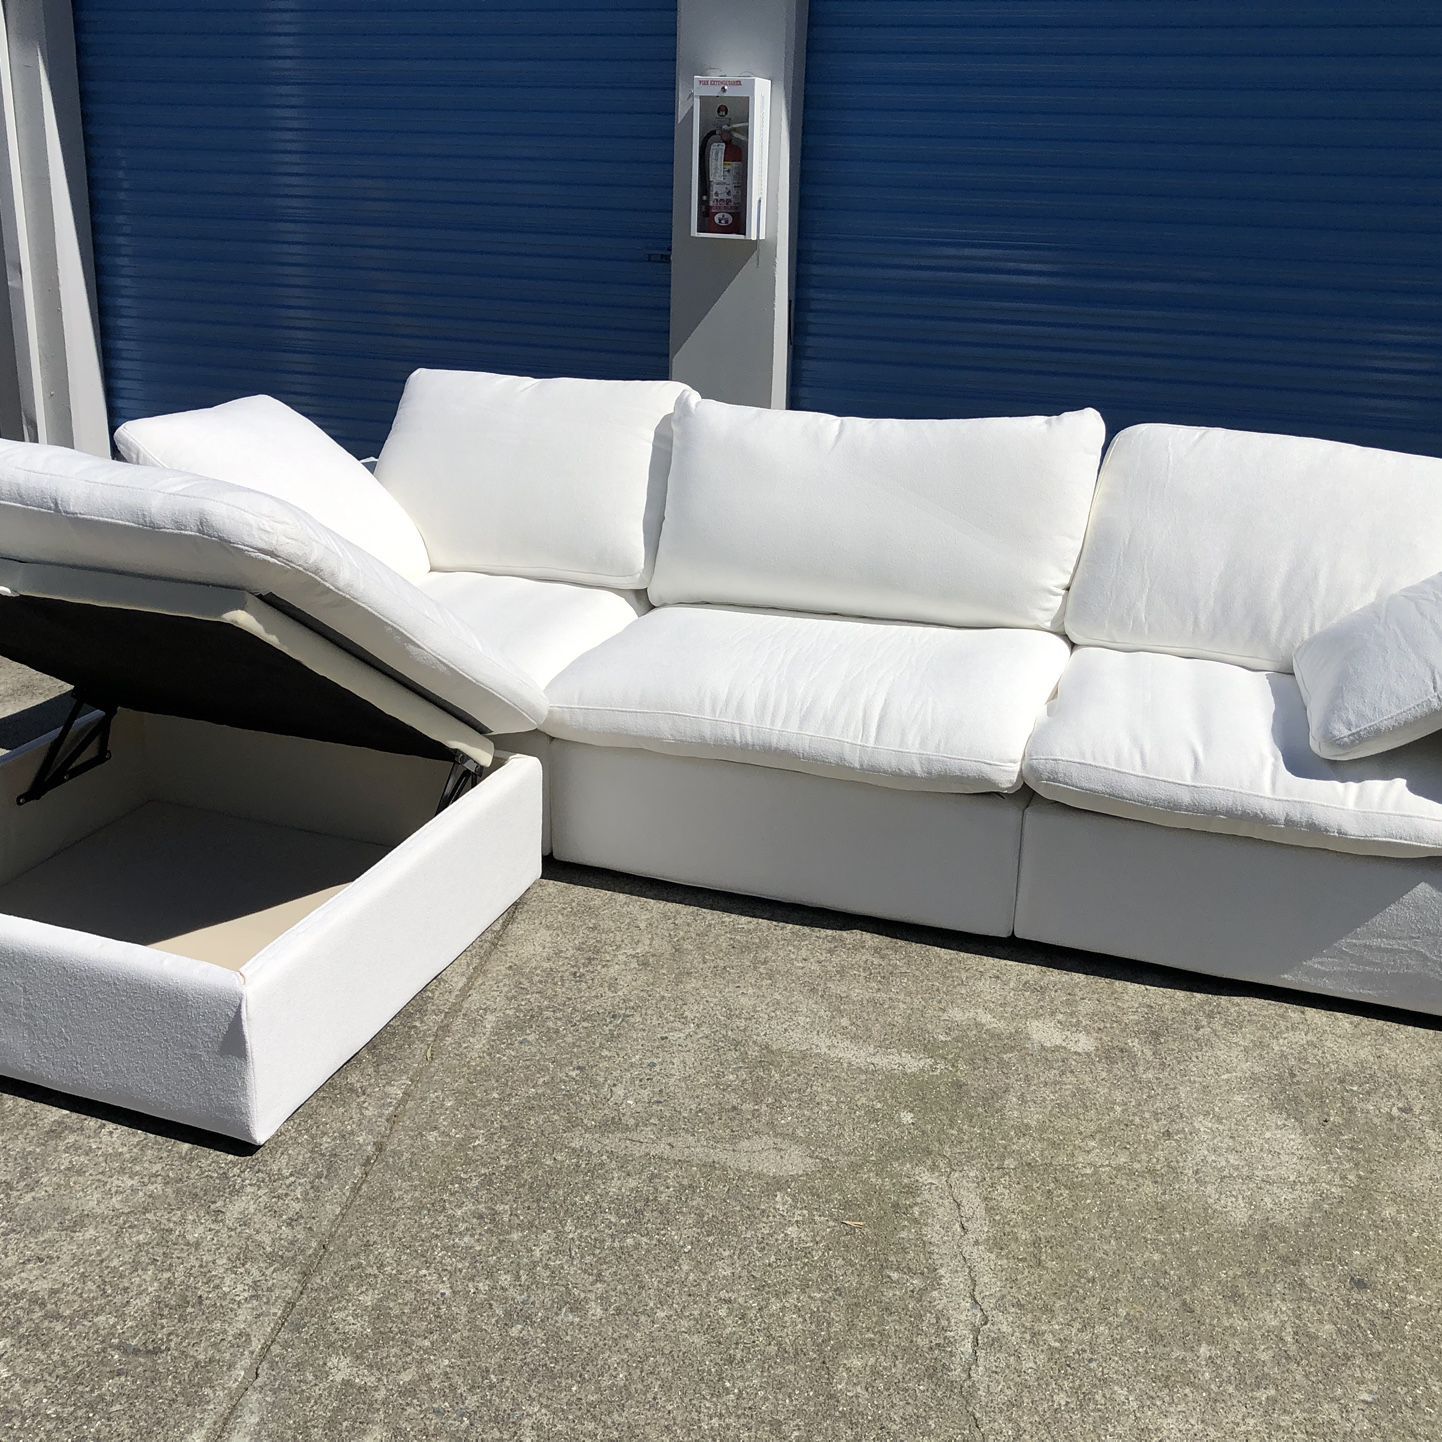 FREE DELIVERY- Brand New Cloud couch 4 Piece 